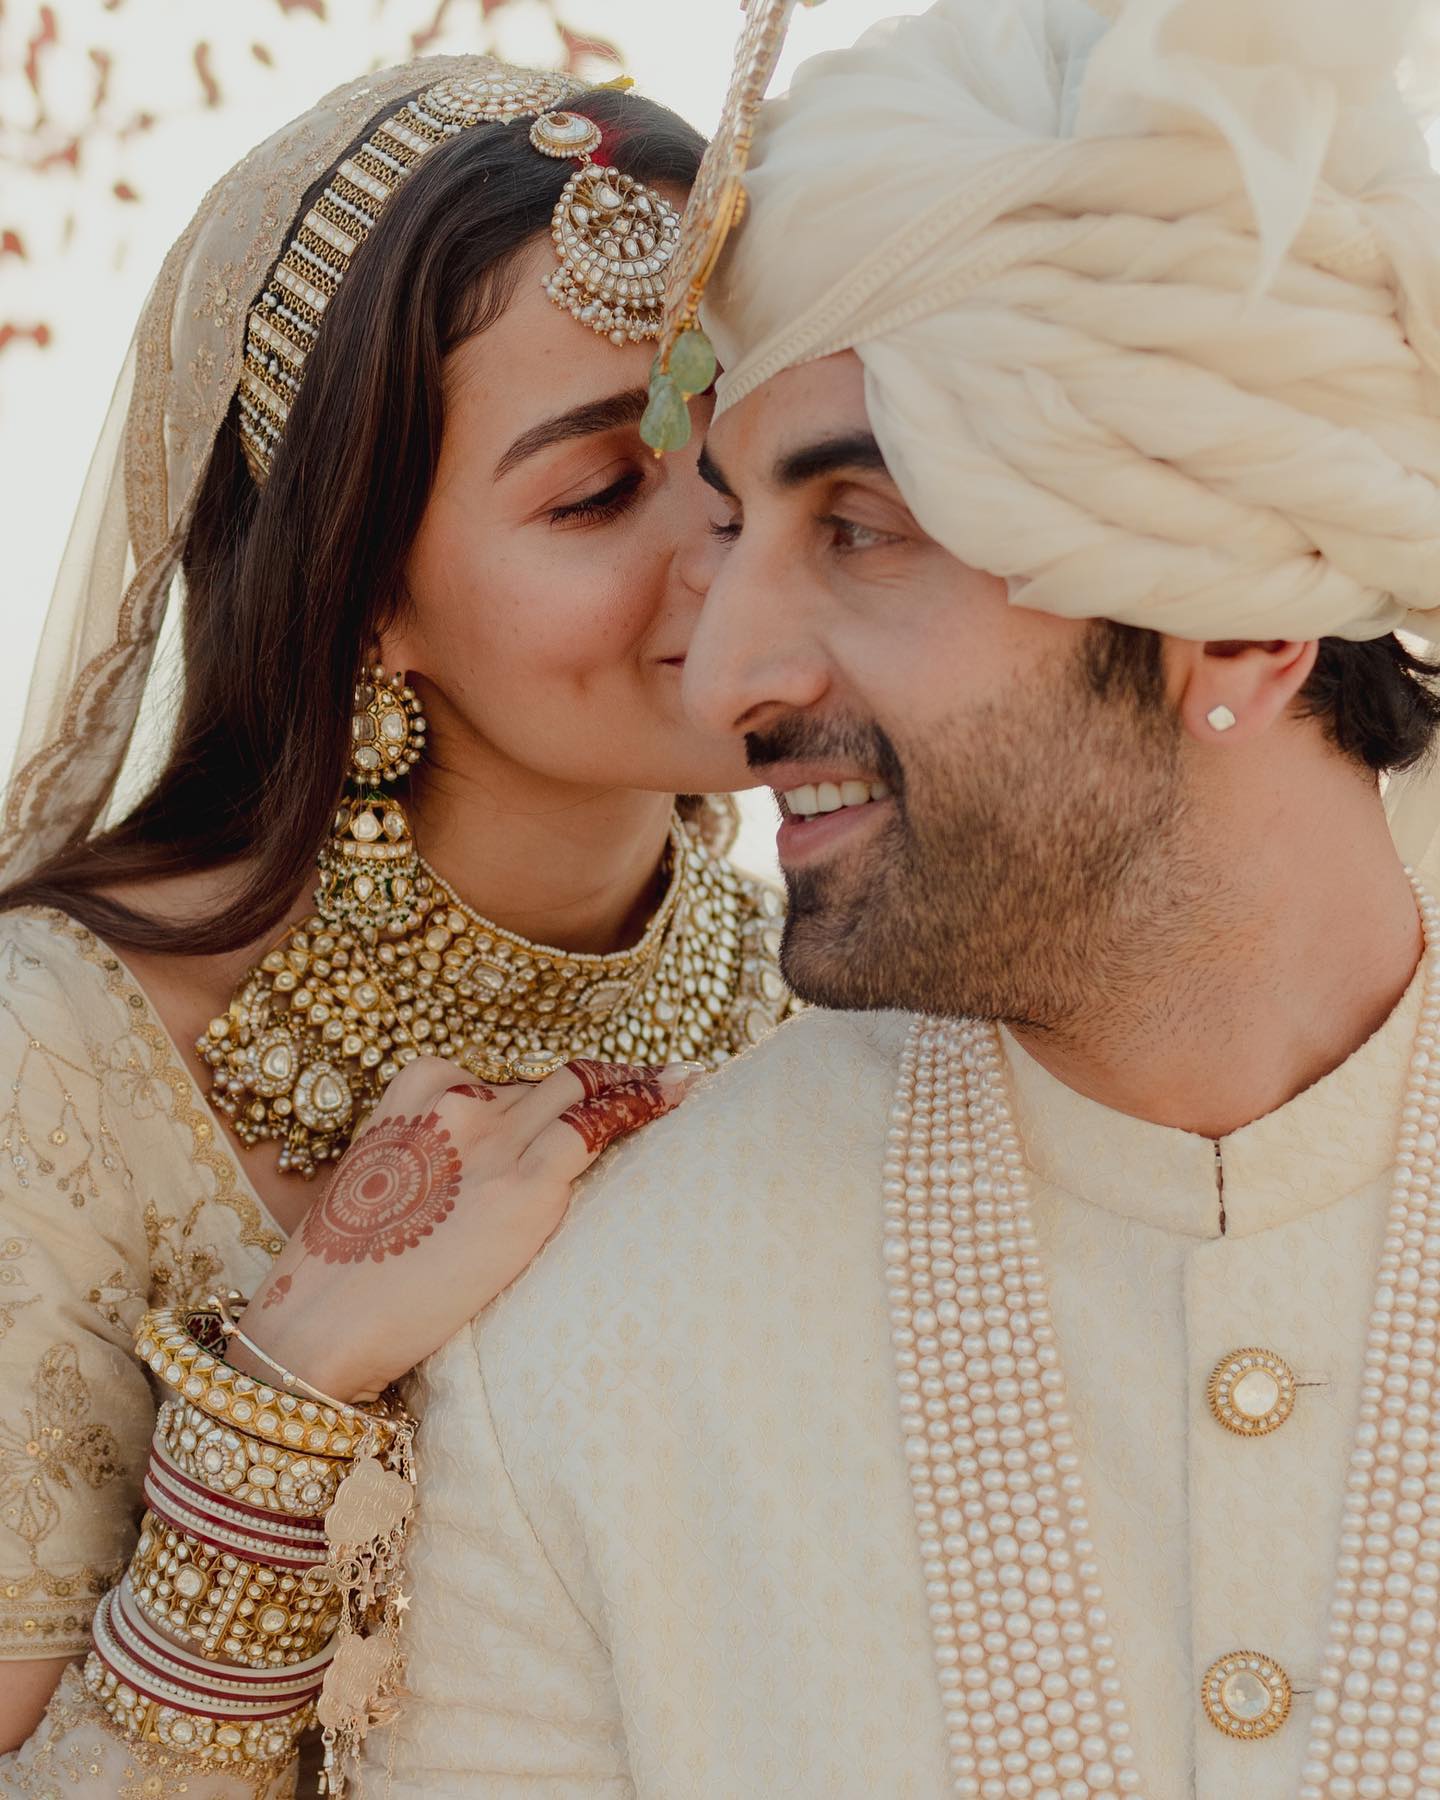 Photos: Ranbir Kapoor & Alia Bhatt's First Pictures As Husband & Wife Are What Dreams Are Made Of